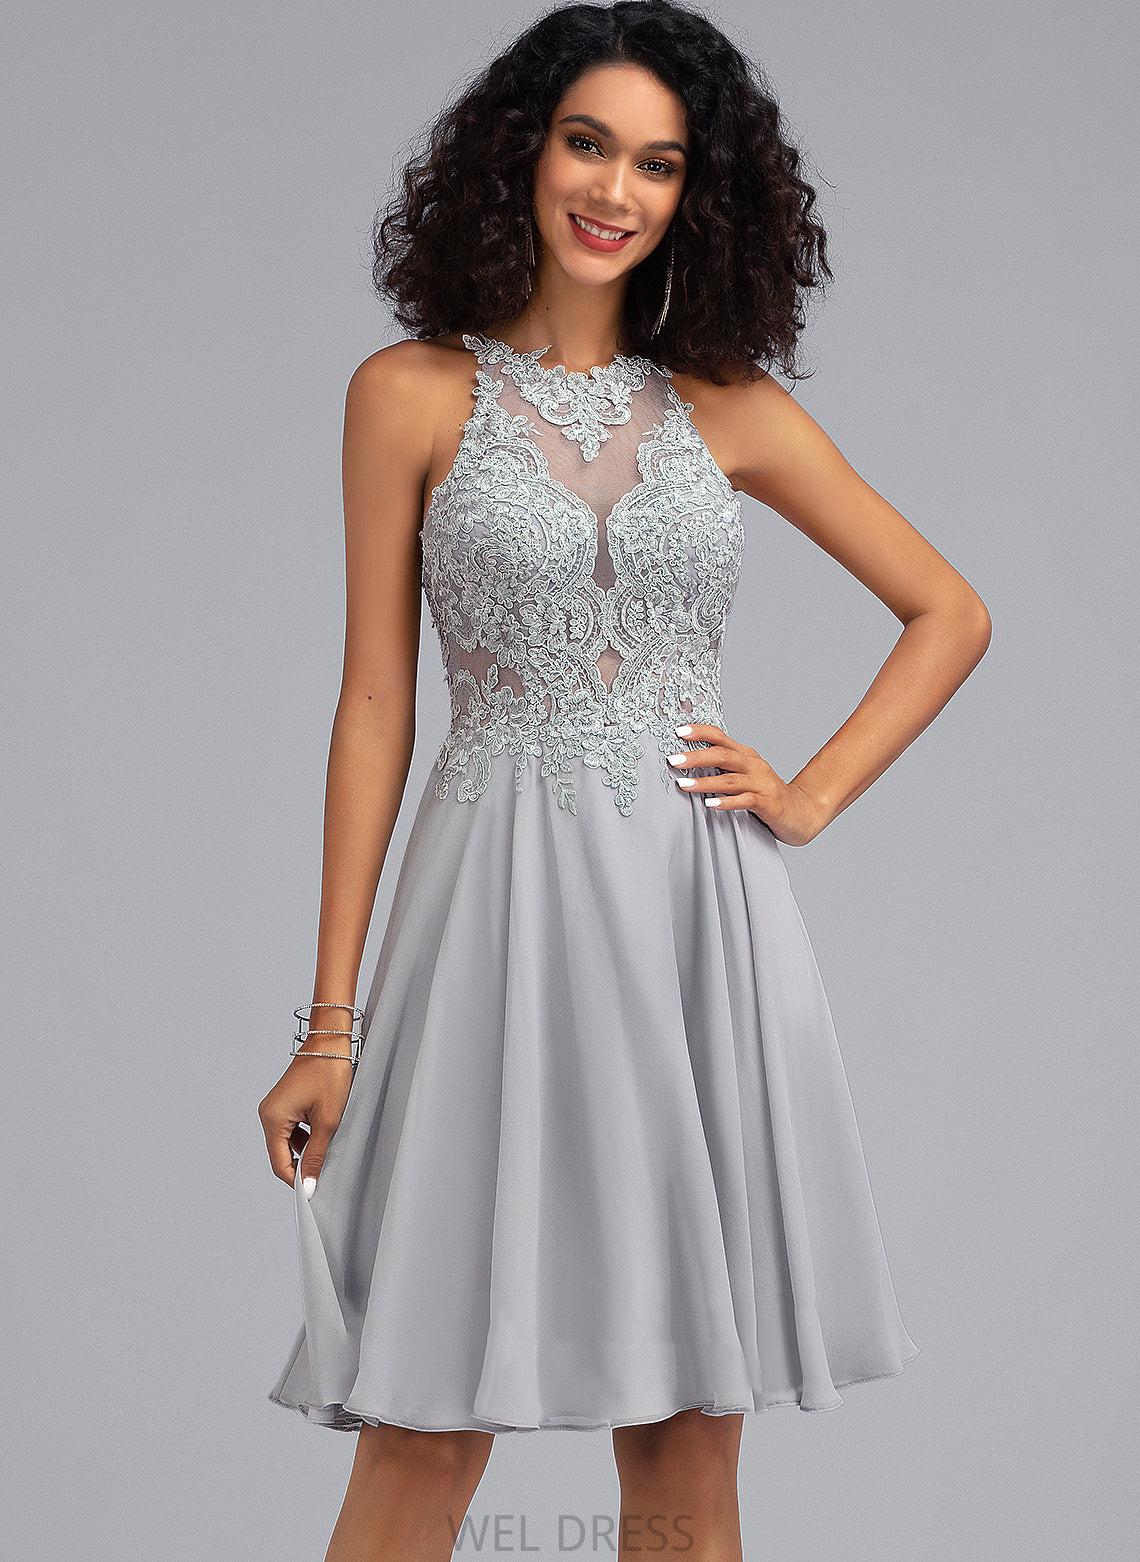 Sequins Yesenia Scoop Chiffon Dress Neck Knee-Length A-Line With Homecoming Dresses Homecoming